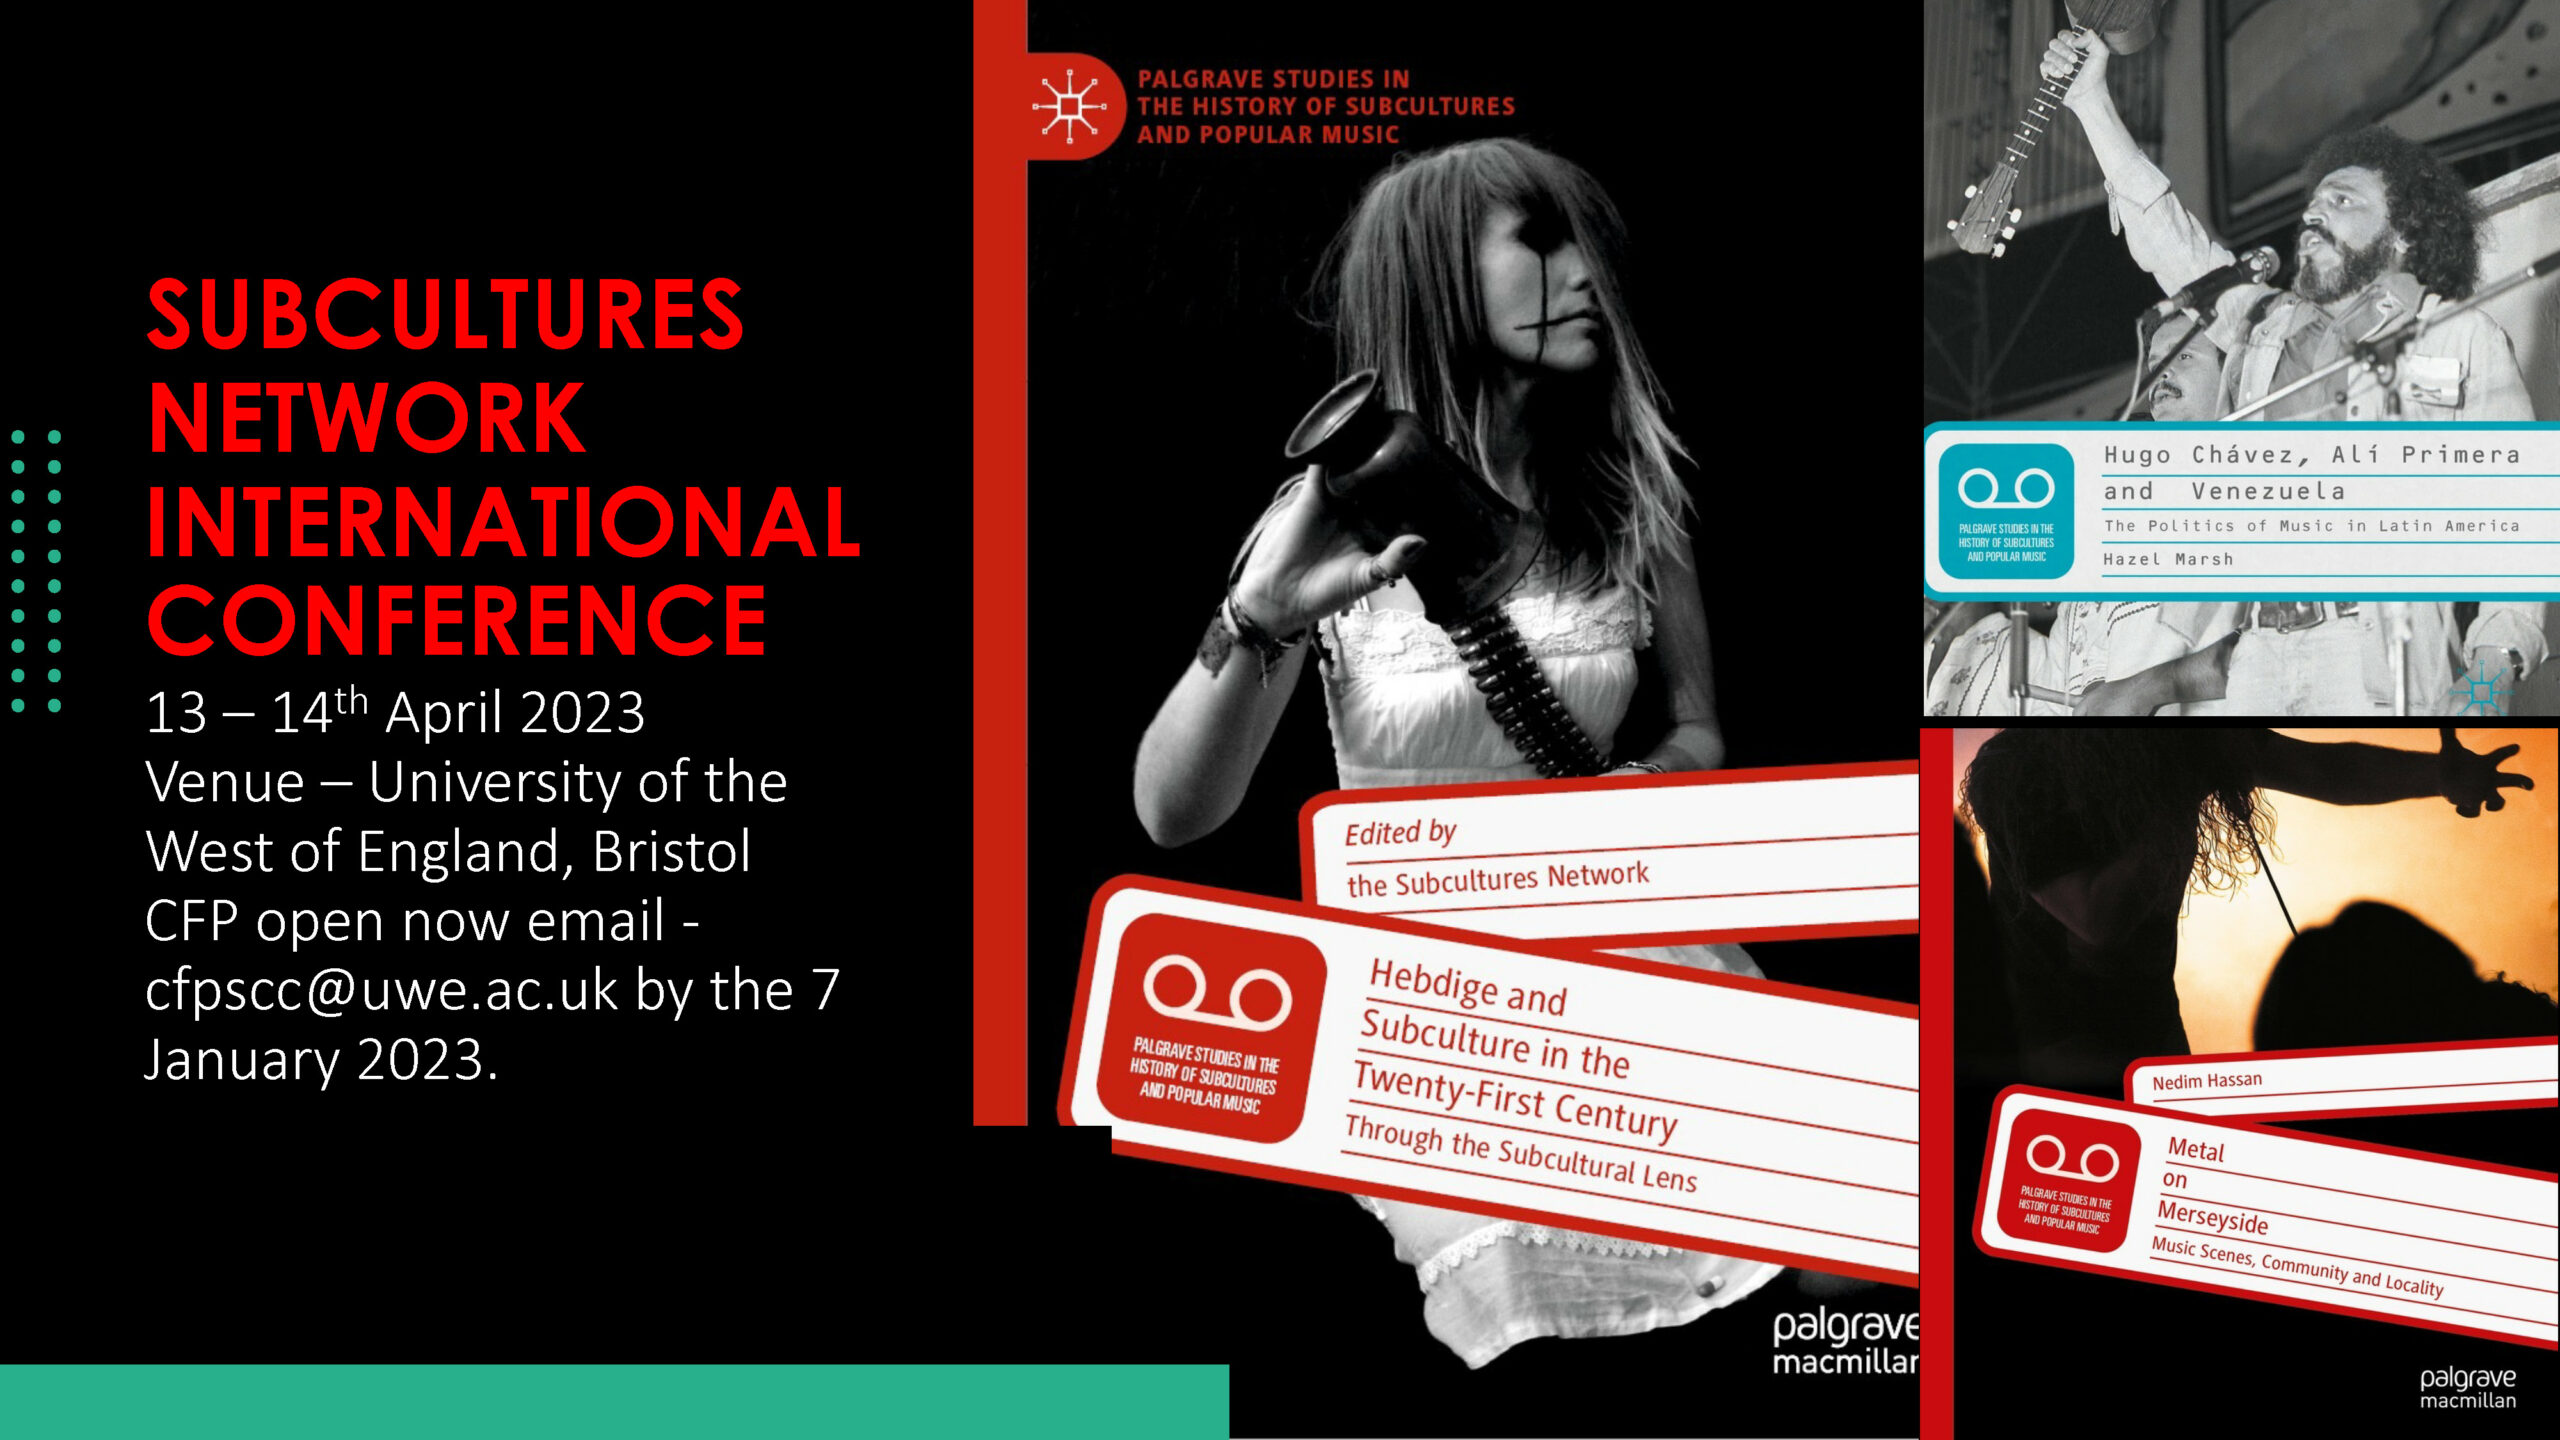 a poster for the subcultures network international conference